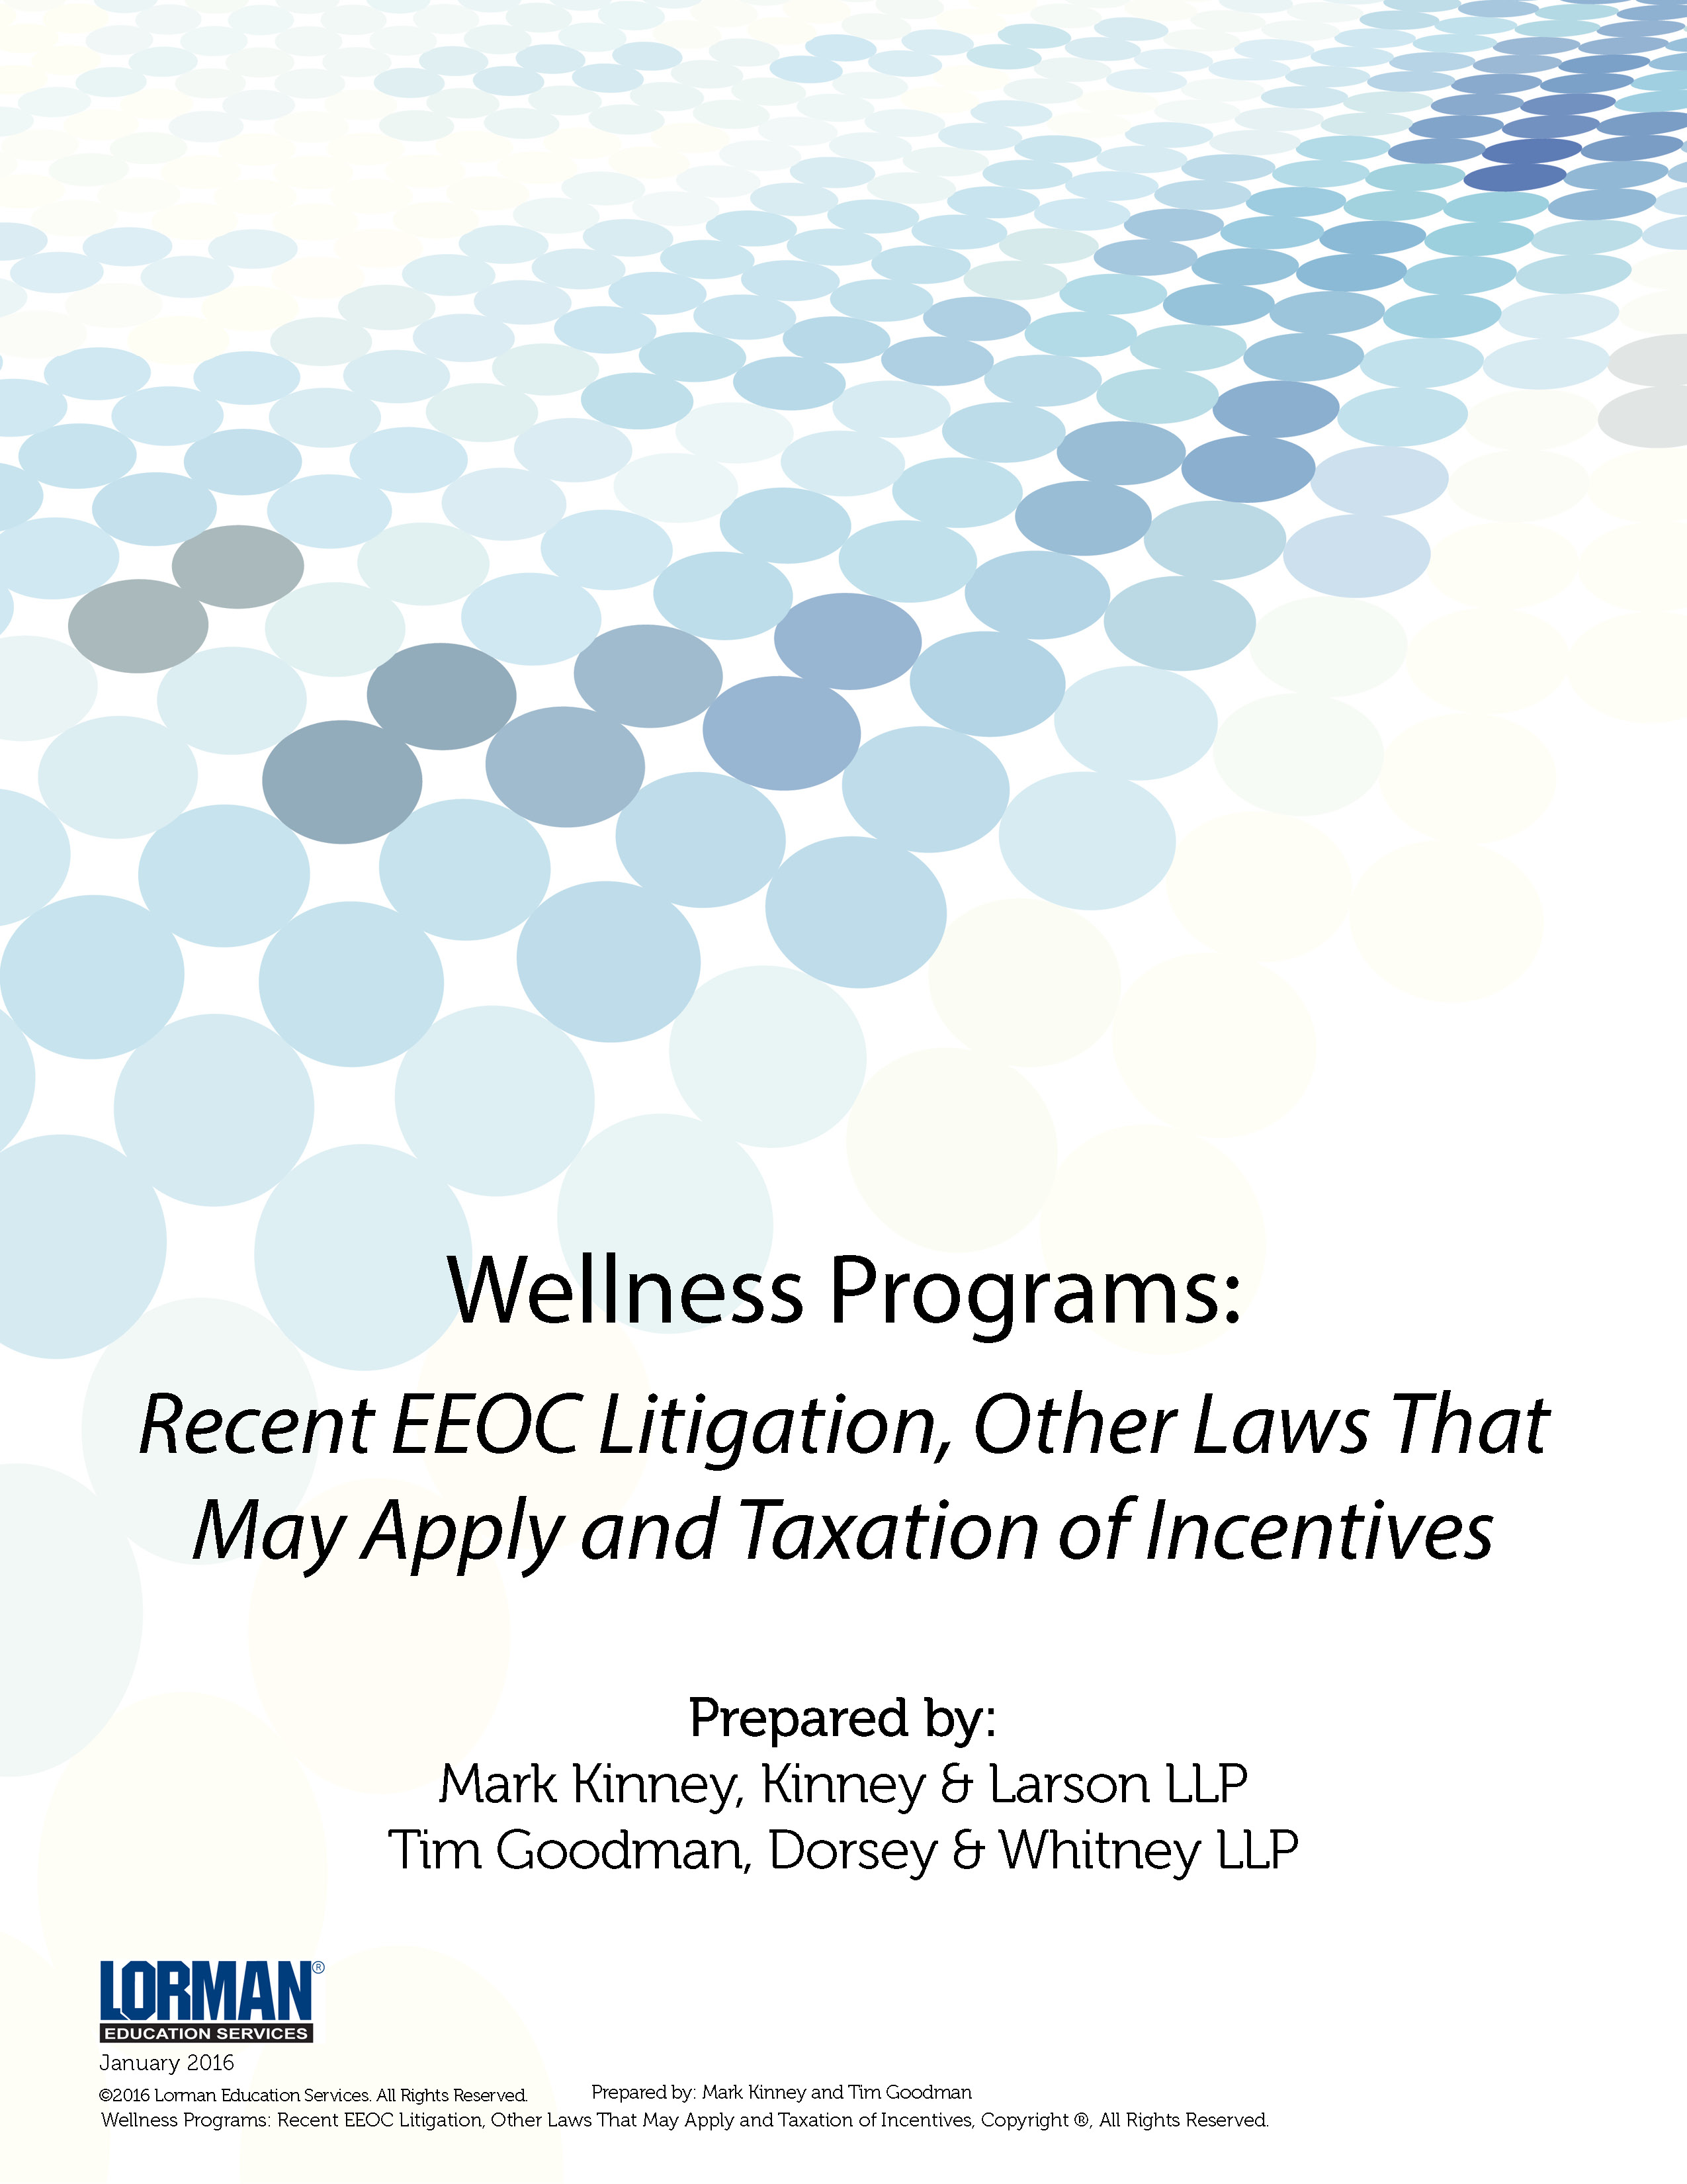 Wellness Programs - Recent EEOC Litigation, Other Laws That May Apply and Taxation of Incentives